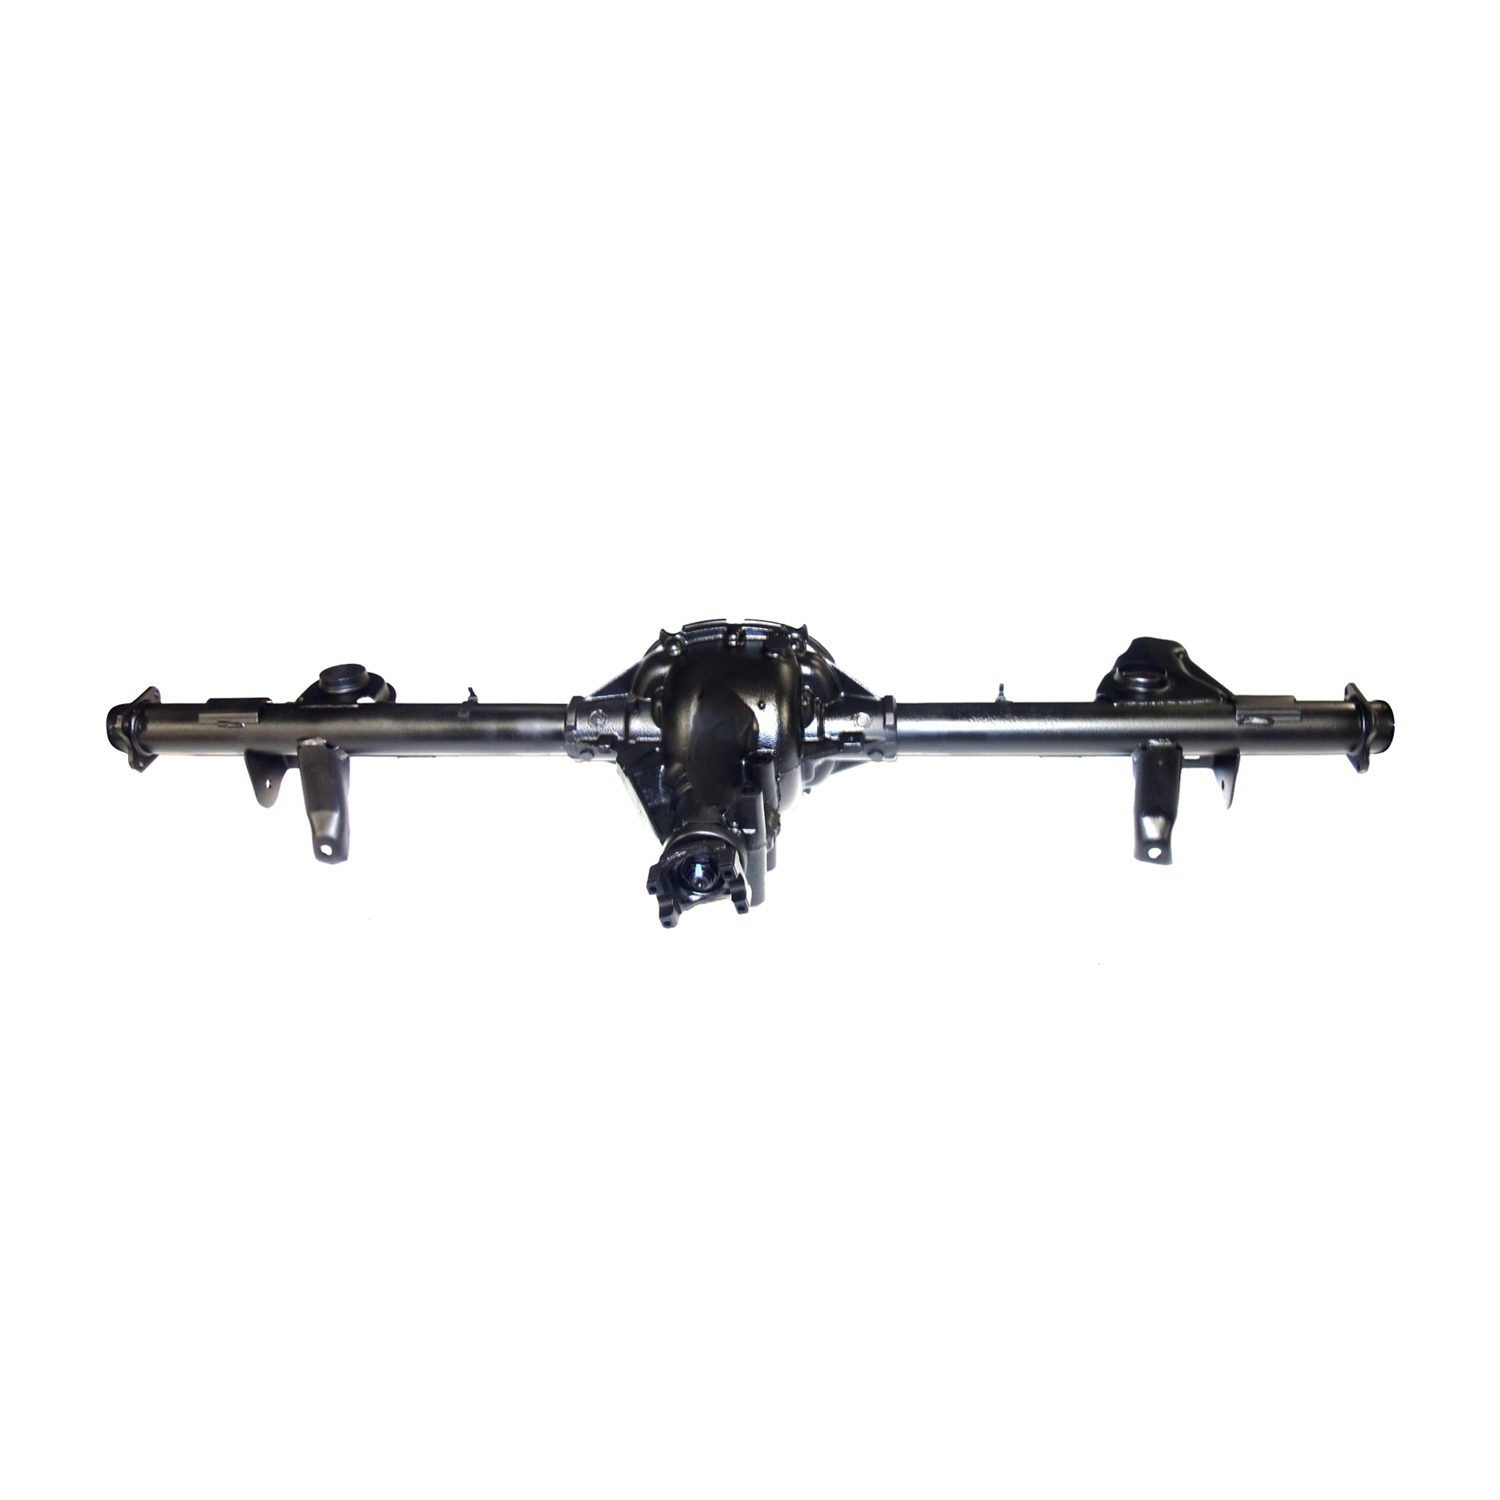 Remanufactured Axle Assy for GM 7.5" 98-03 S10 & S15 3.73 , 2wd, Chassis Pkg, Posi LSD